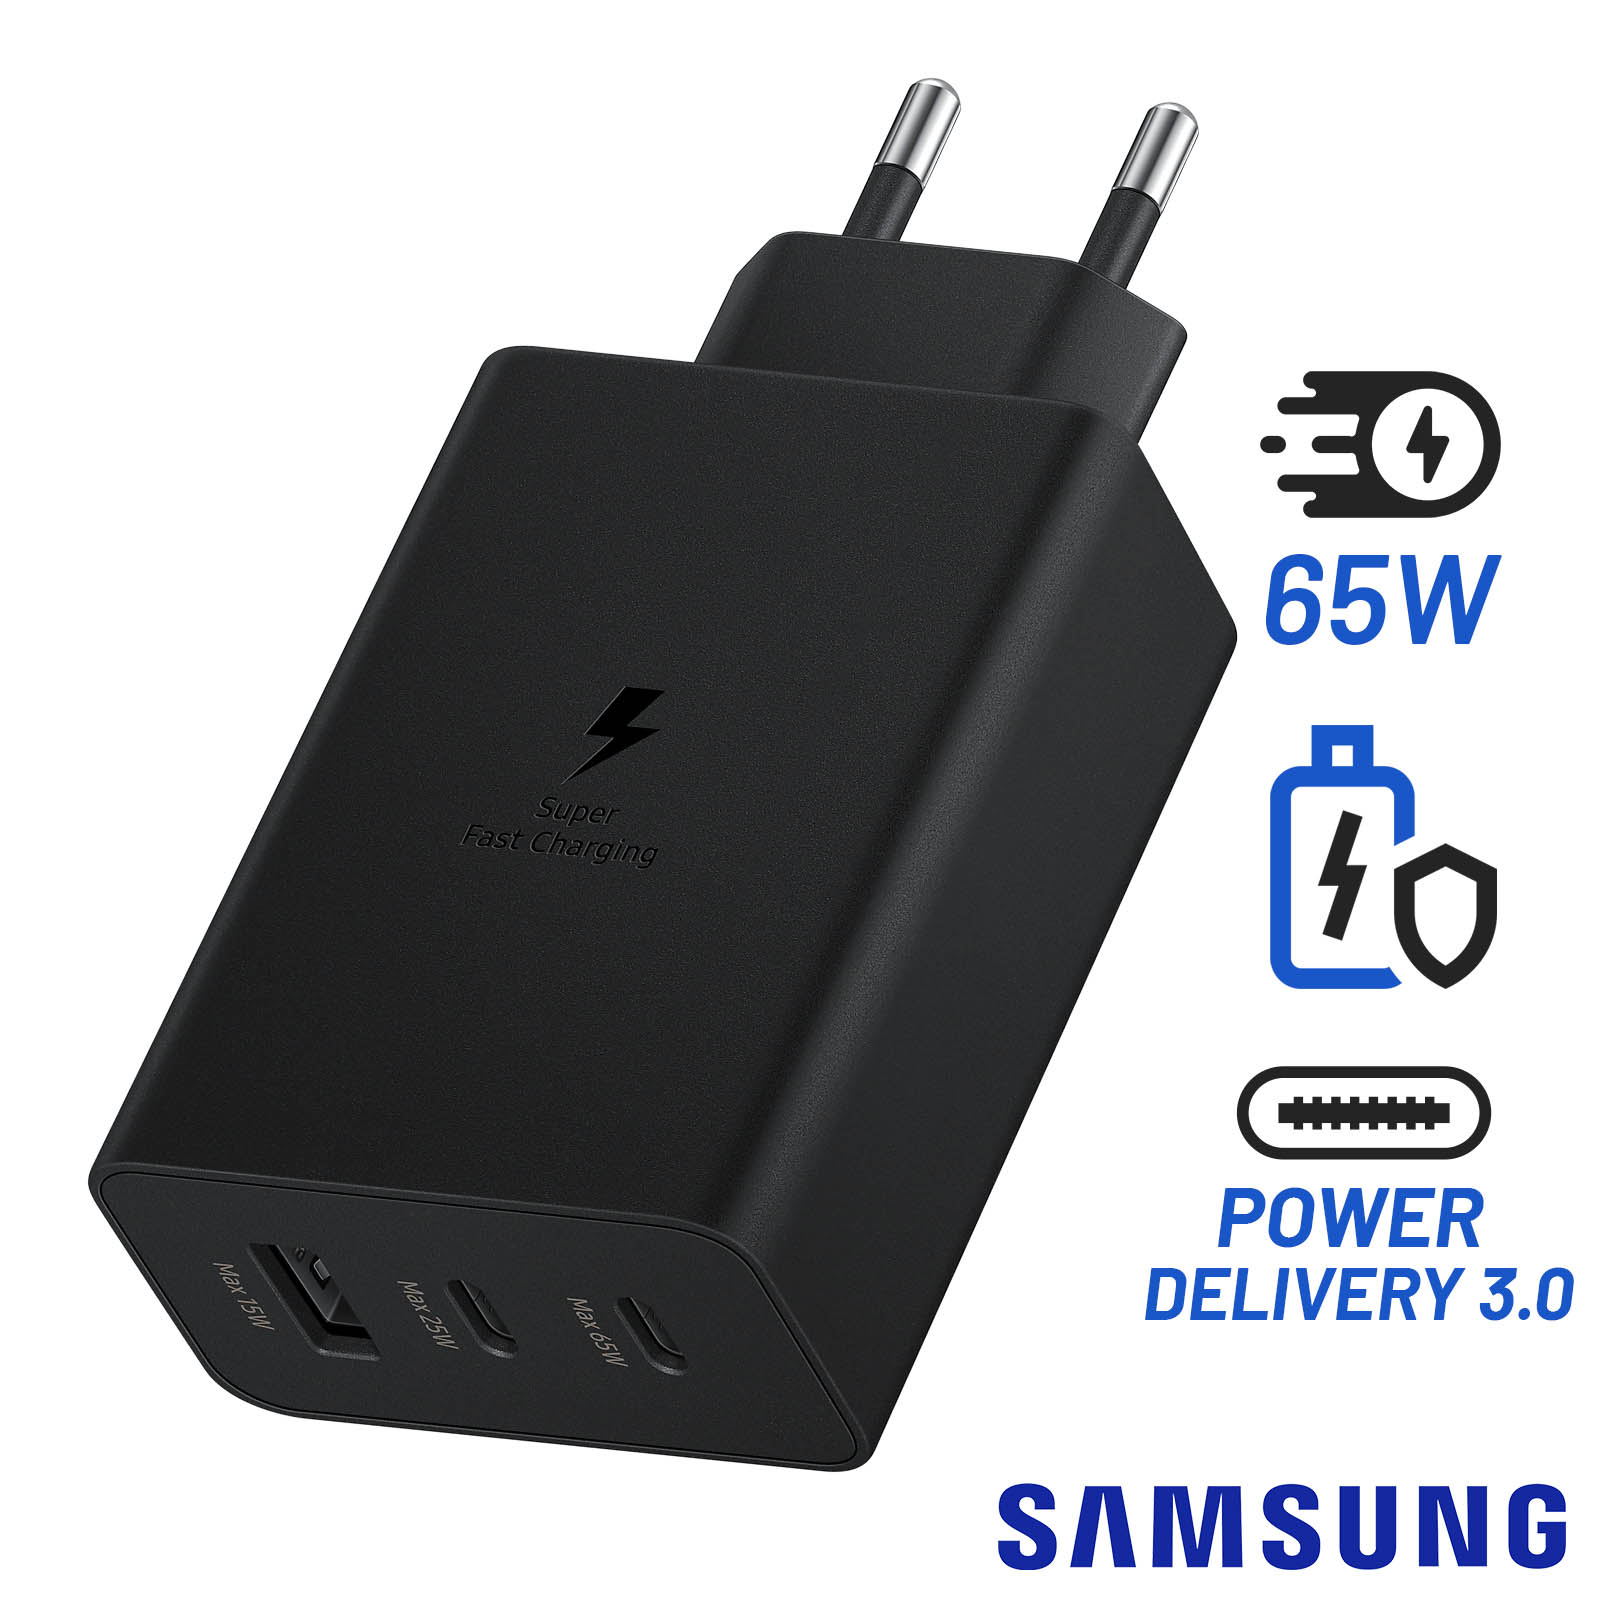 Chargeur Asus X93s pas cher - Achat neuf et occasion